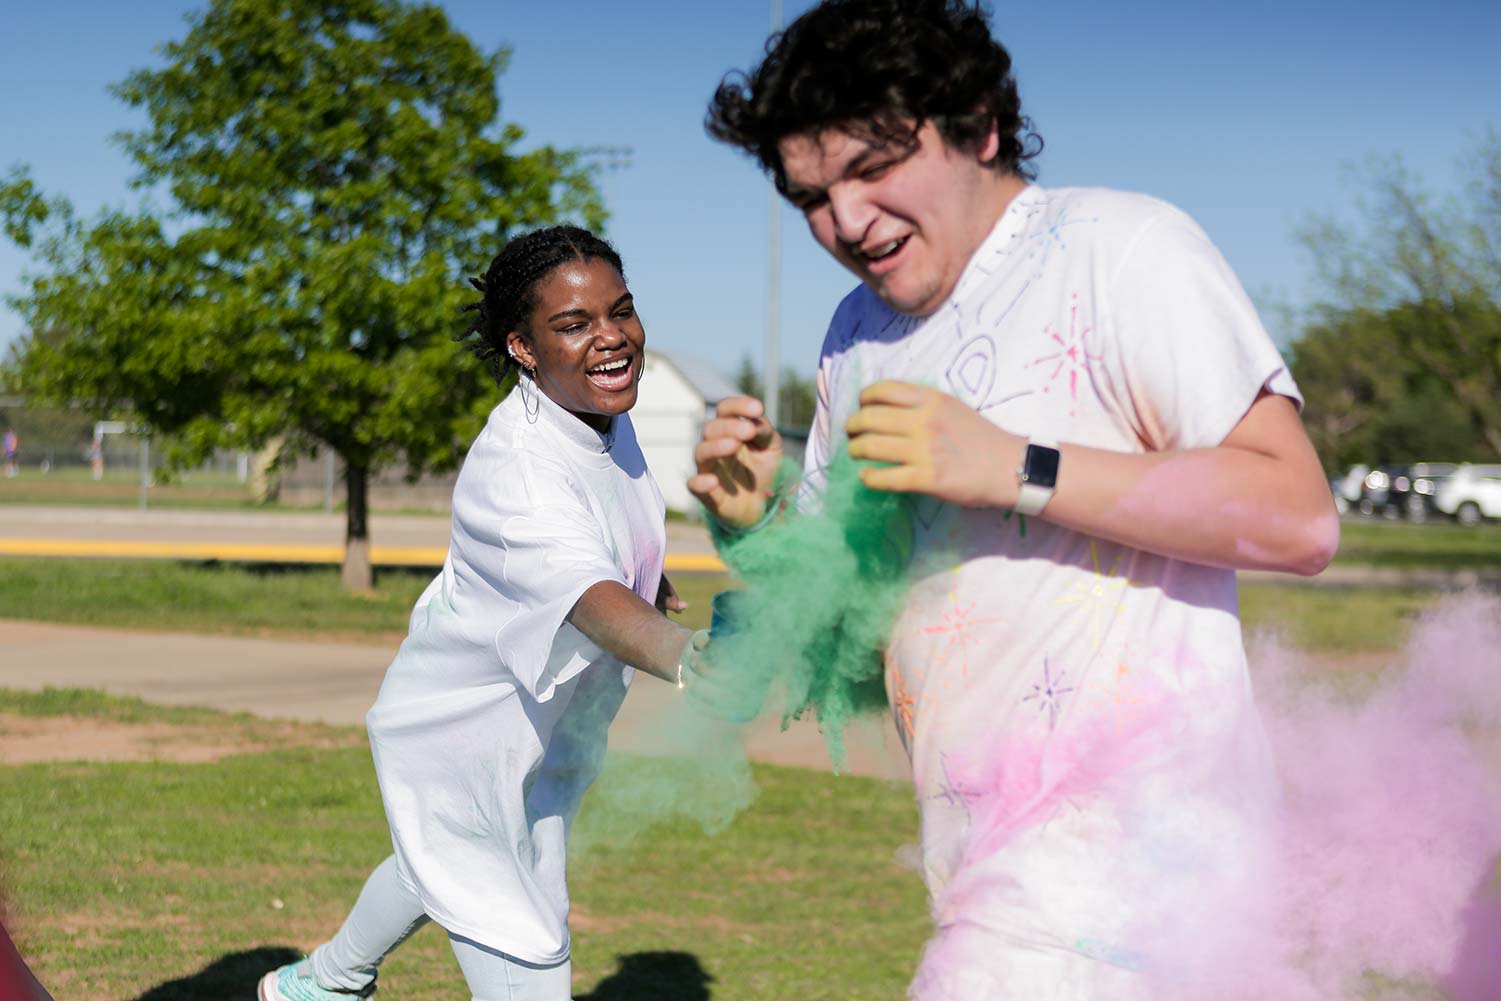 A runner passes through multiple dust clouds, April 12. The color run event has been a longstanding event at MSU.